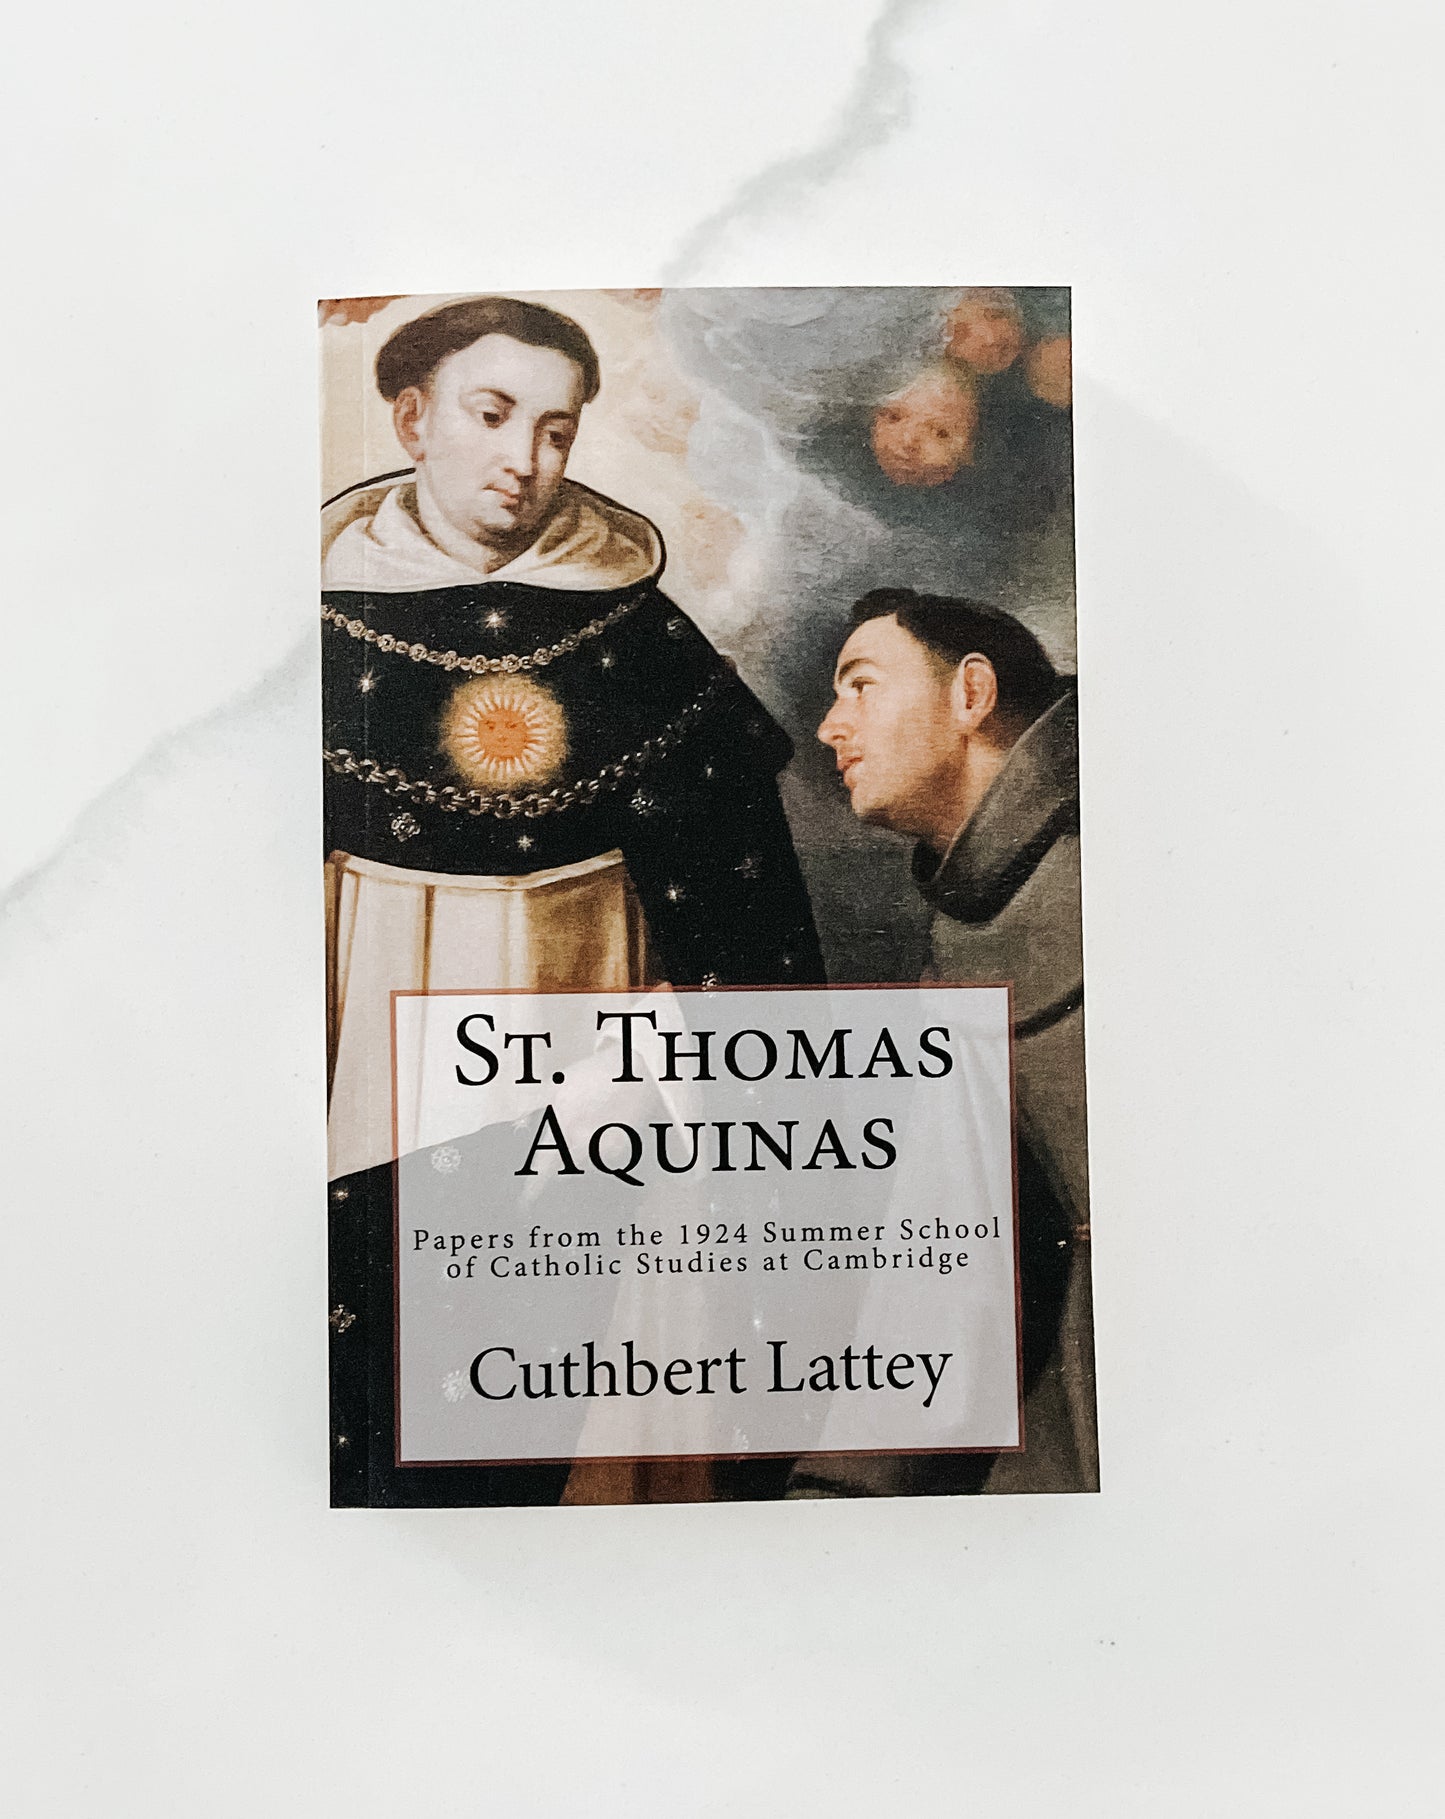 St. Thomas Aquinas: Papers from the 1924 Summer School of Catholic Studies at Cambridge